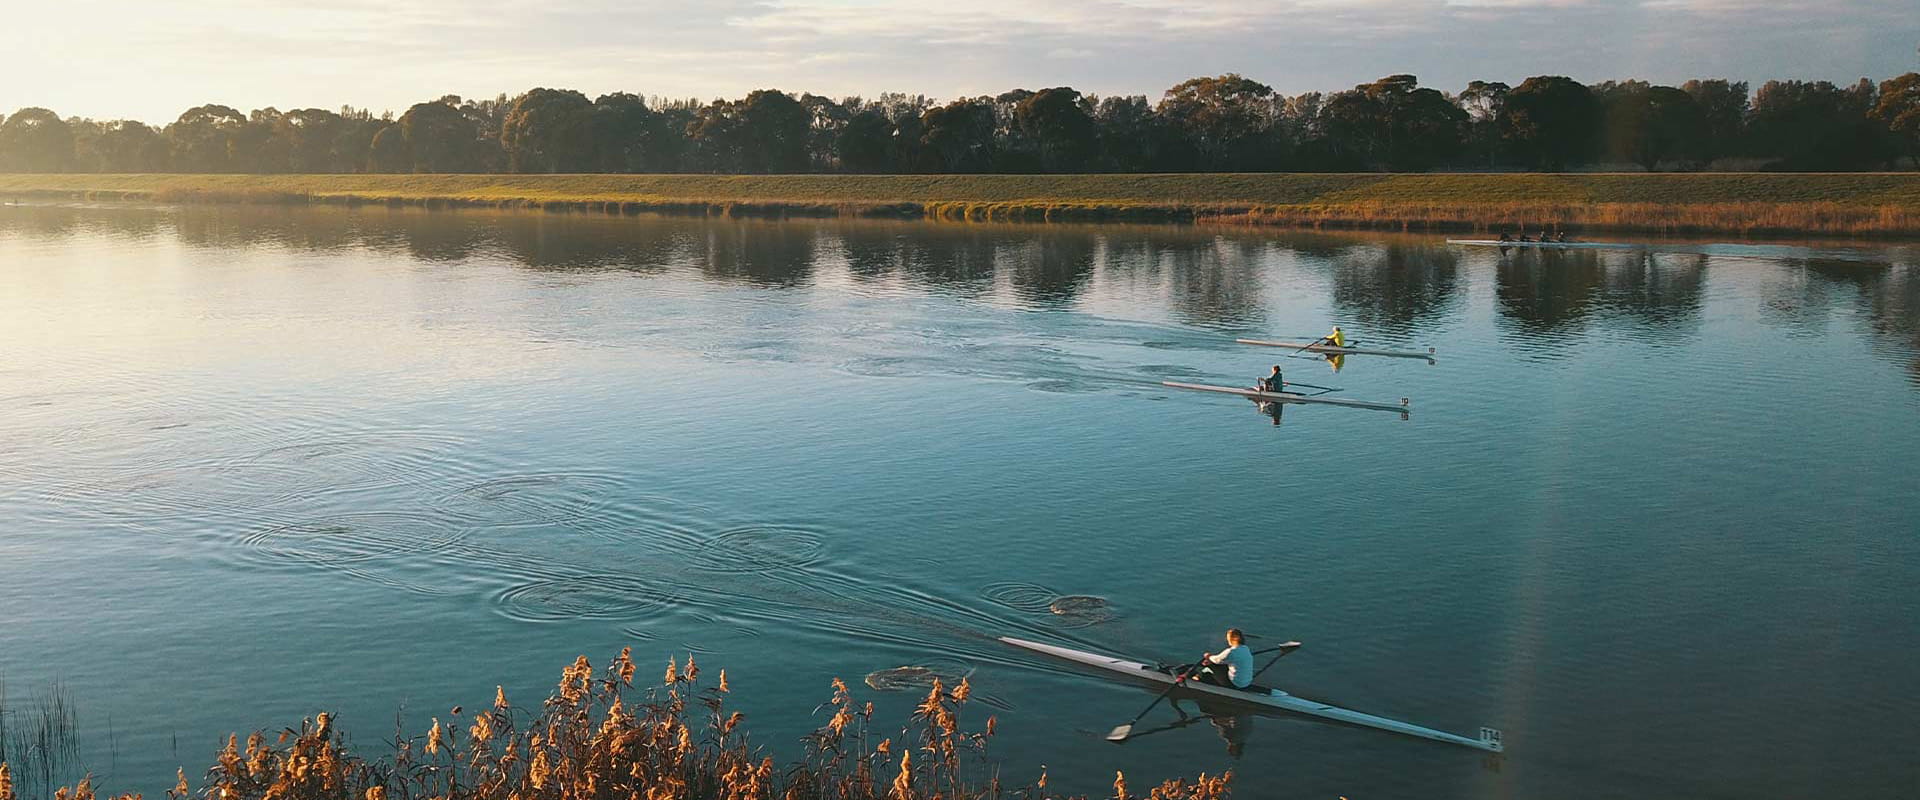 Three single scul rowers row along a river early in the morning